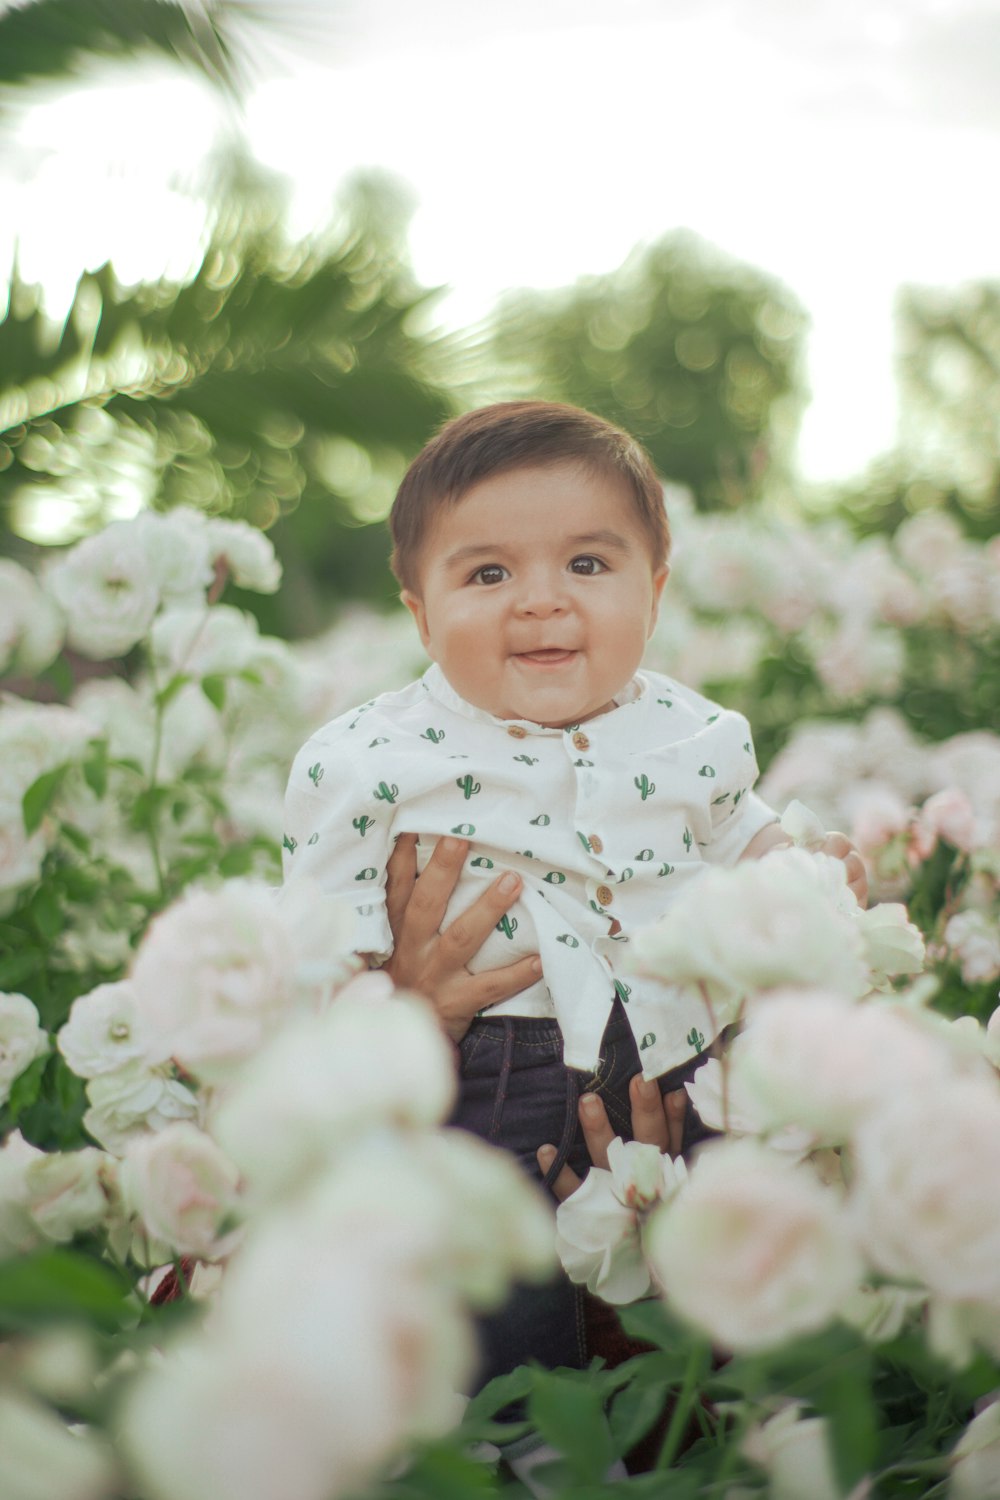 a baby in a white shirt surrounded by white flowers